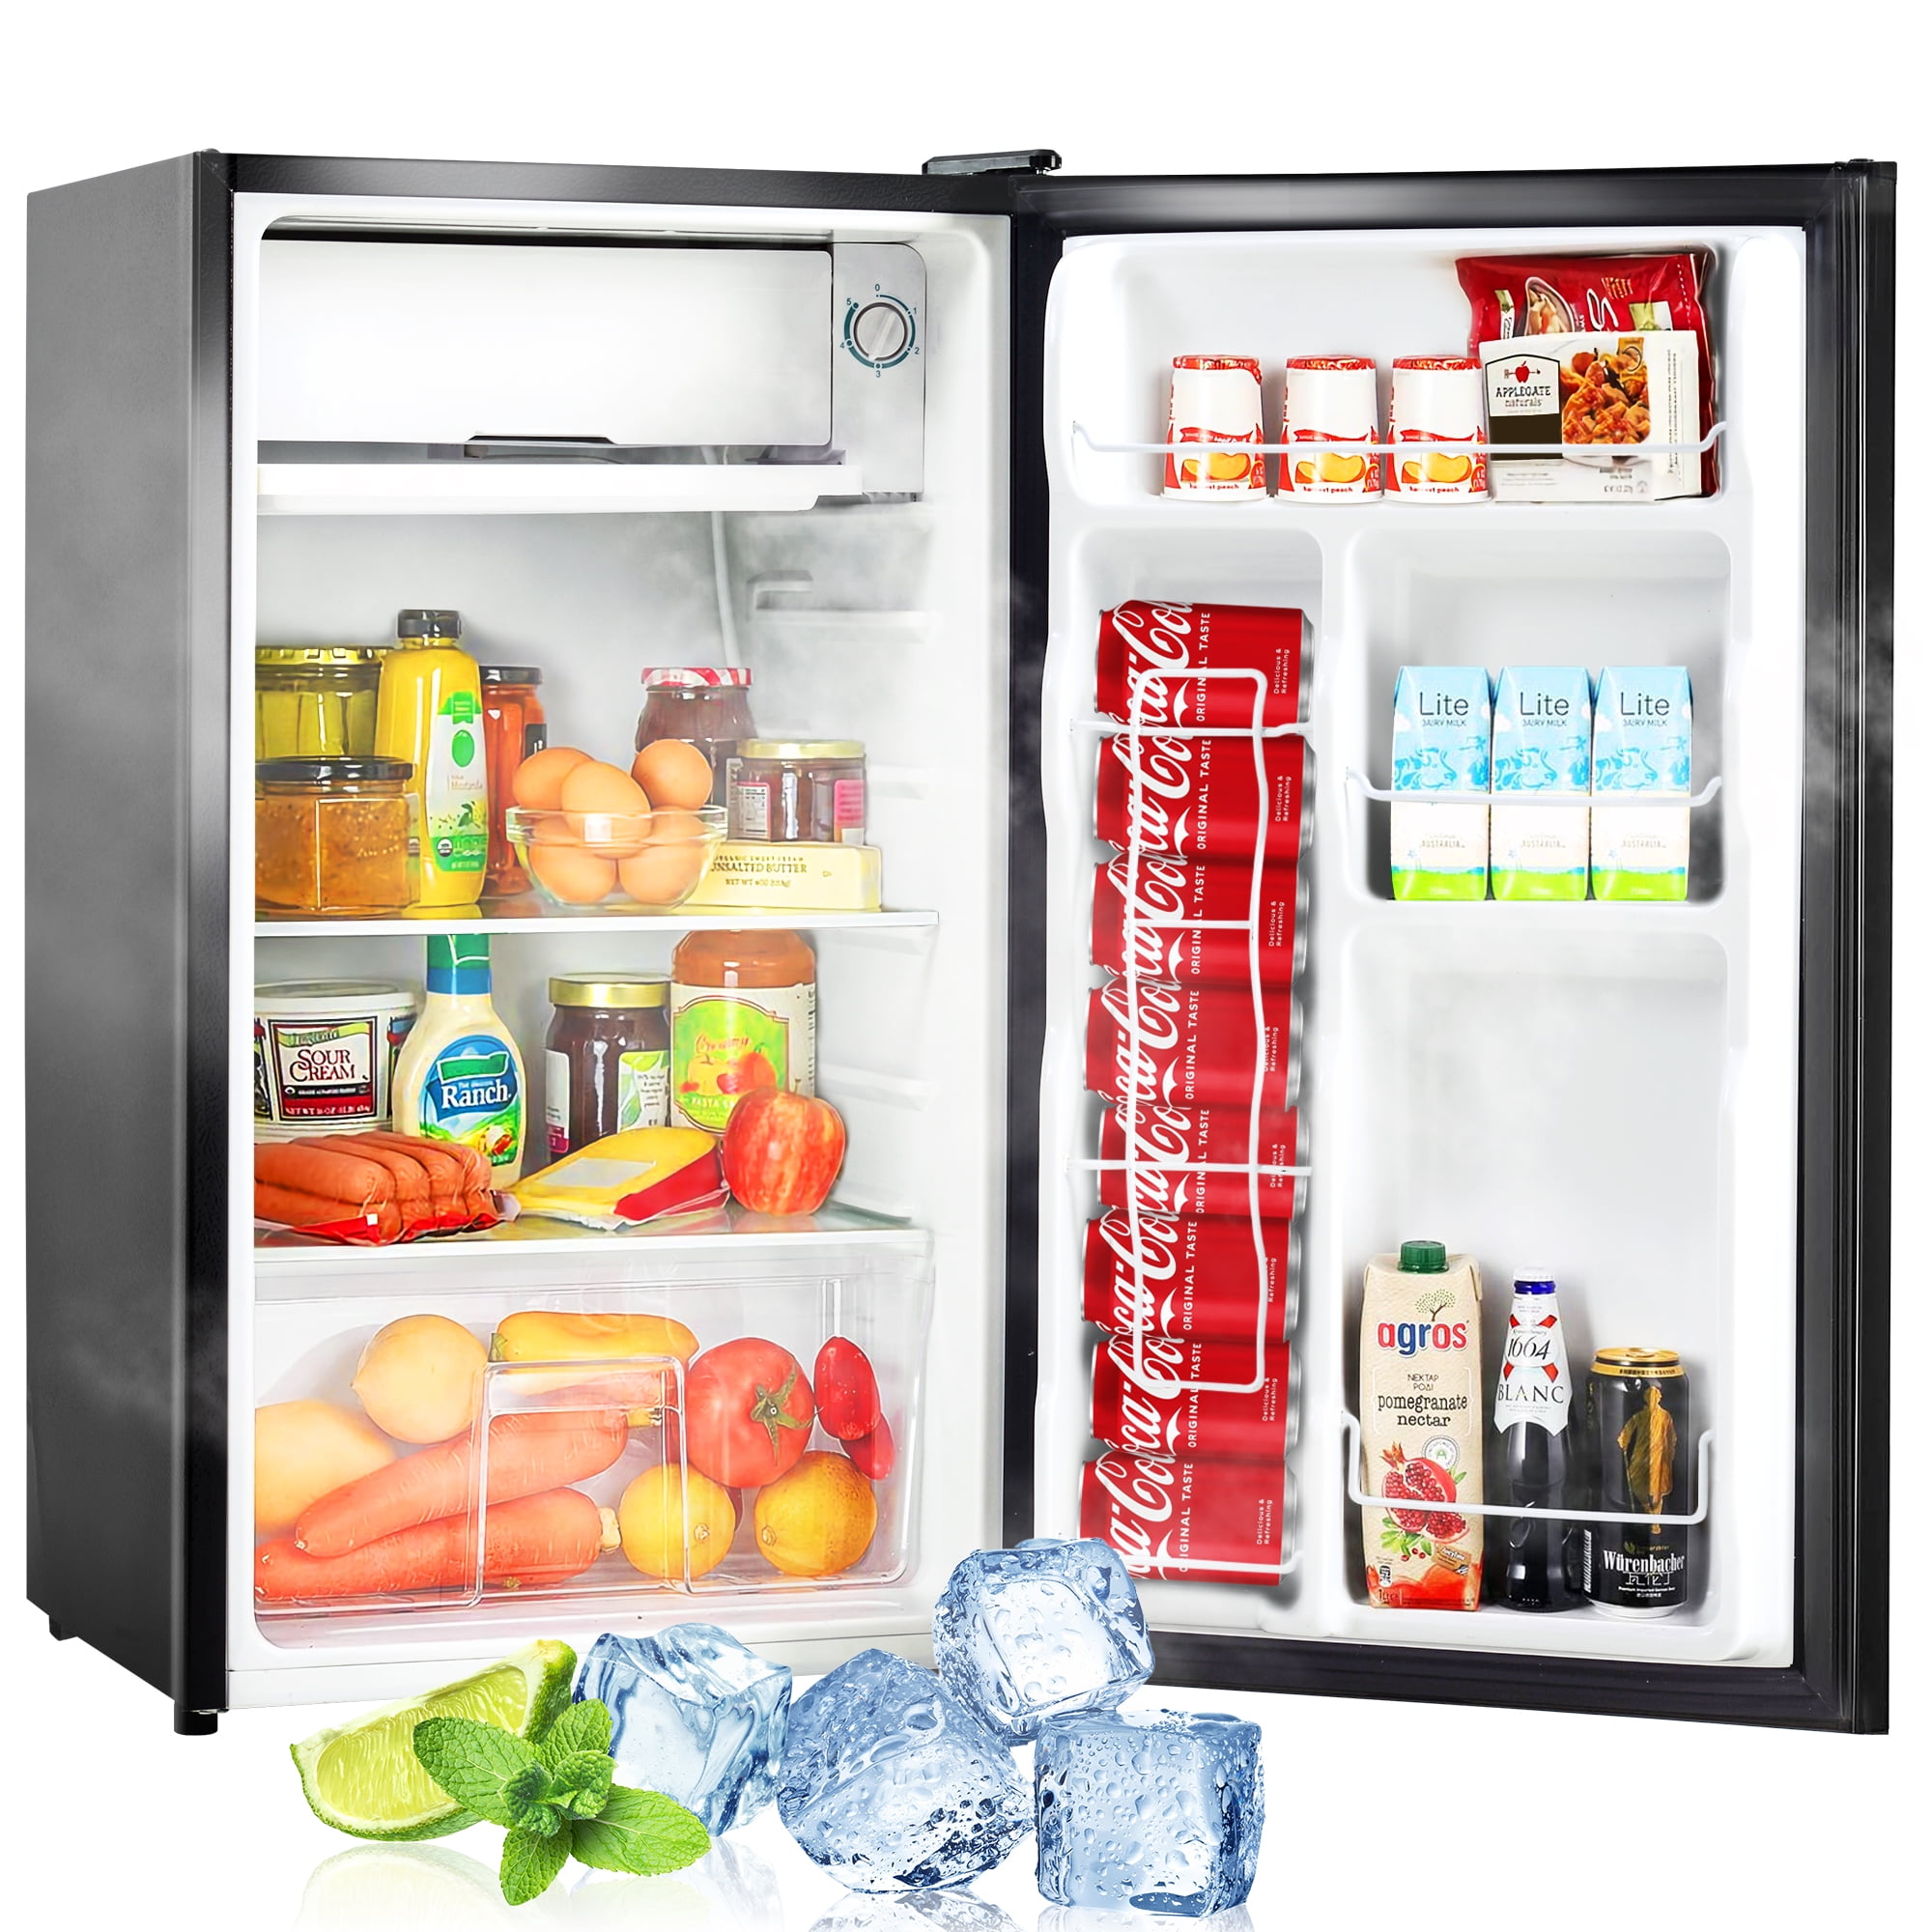 Mini Fridge with Freezer 2 Door for Home Dorm or Office, SEGMART Mini  Refrigerator Adjustable Remove Glass Shelves Compact Refrigerator 3.2 cu ft  for Small Place, Gift for Girlfriend Bedroom, S11312 - Walmart.com